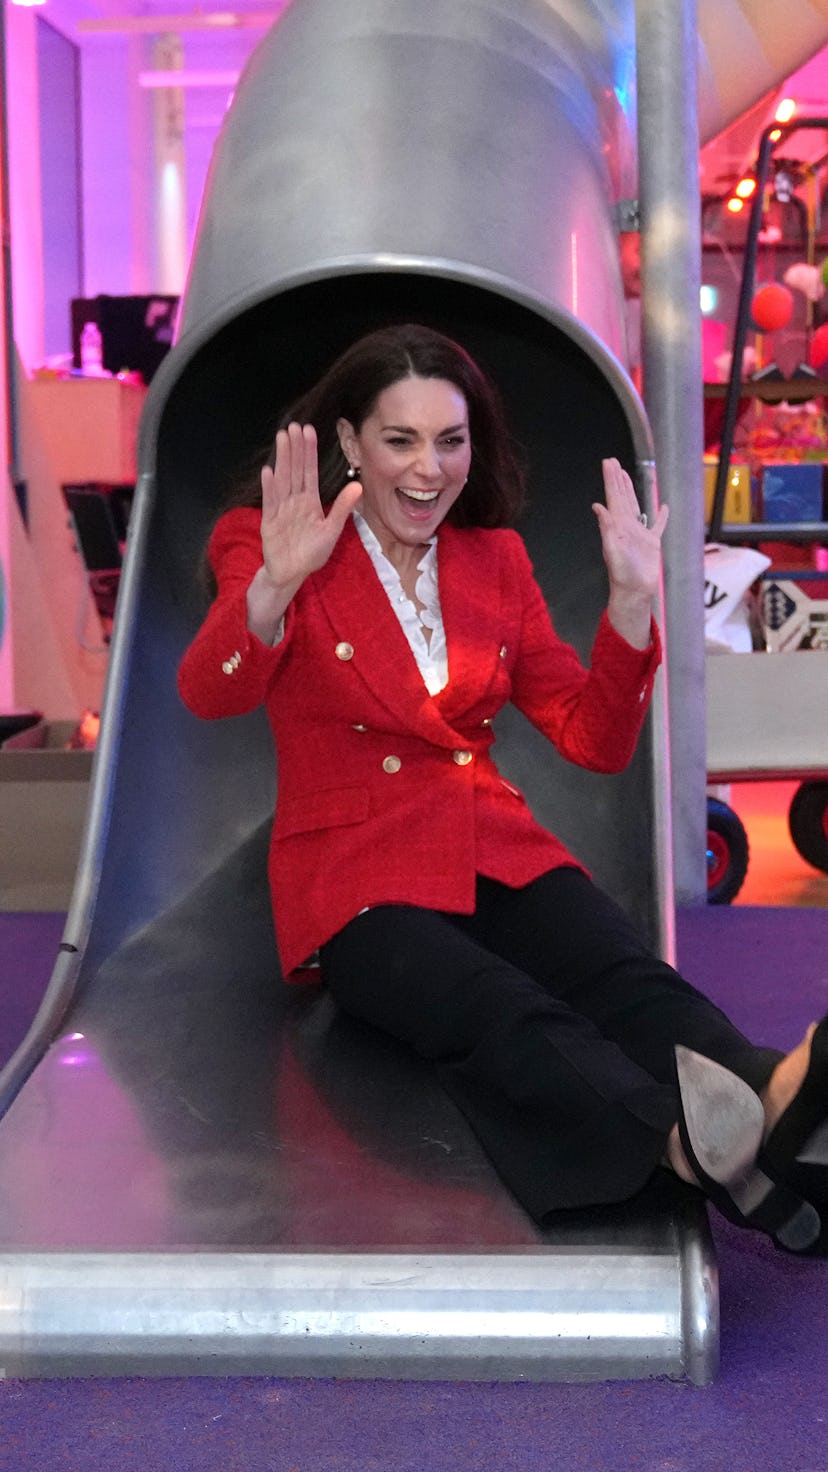 Catherine, Duchess of Cambridge uses a slide during a visit to the LEGO Foundation PlayLab on Februa...